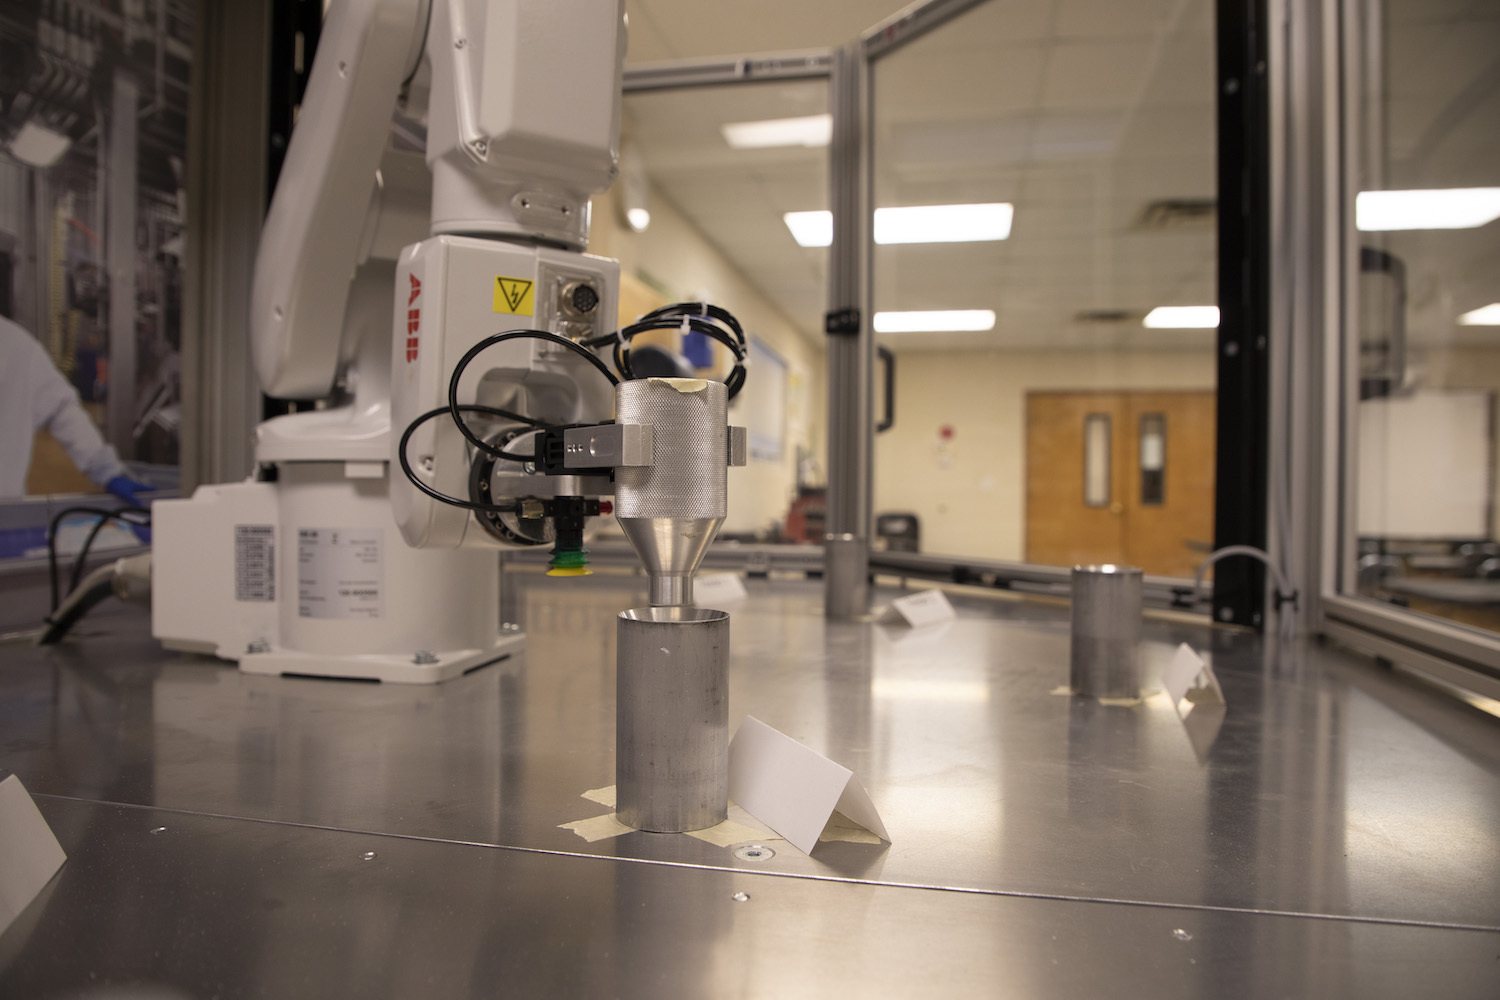 A six-axis robotic arm donated by Tysons Foods at the U of A System Division of Agriculture August 2020